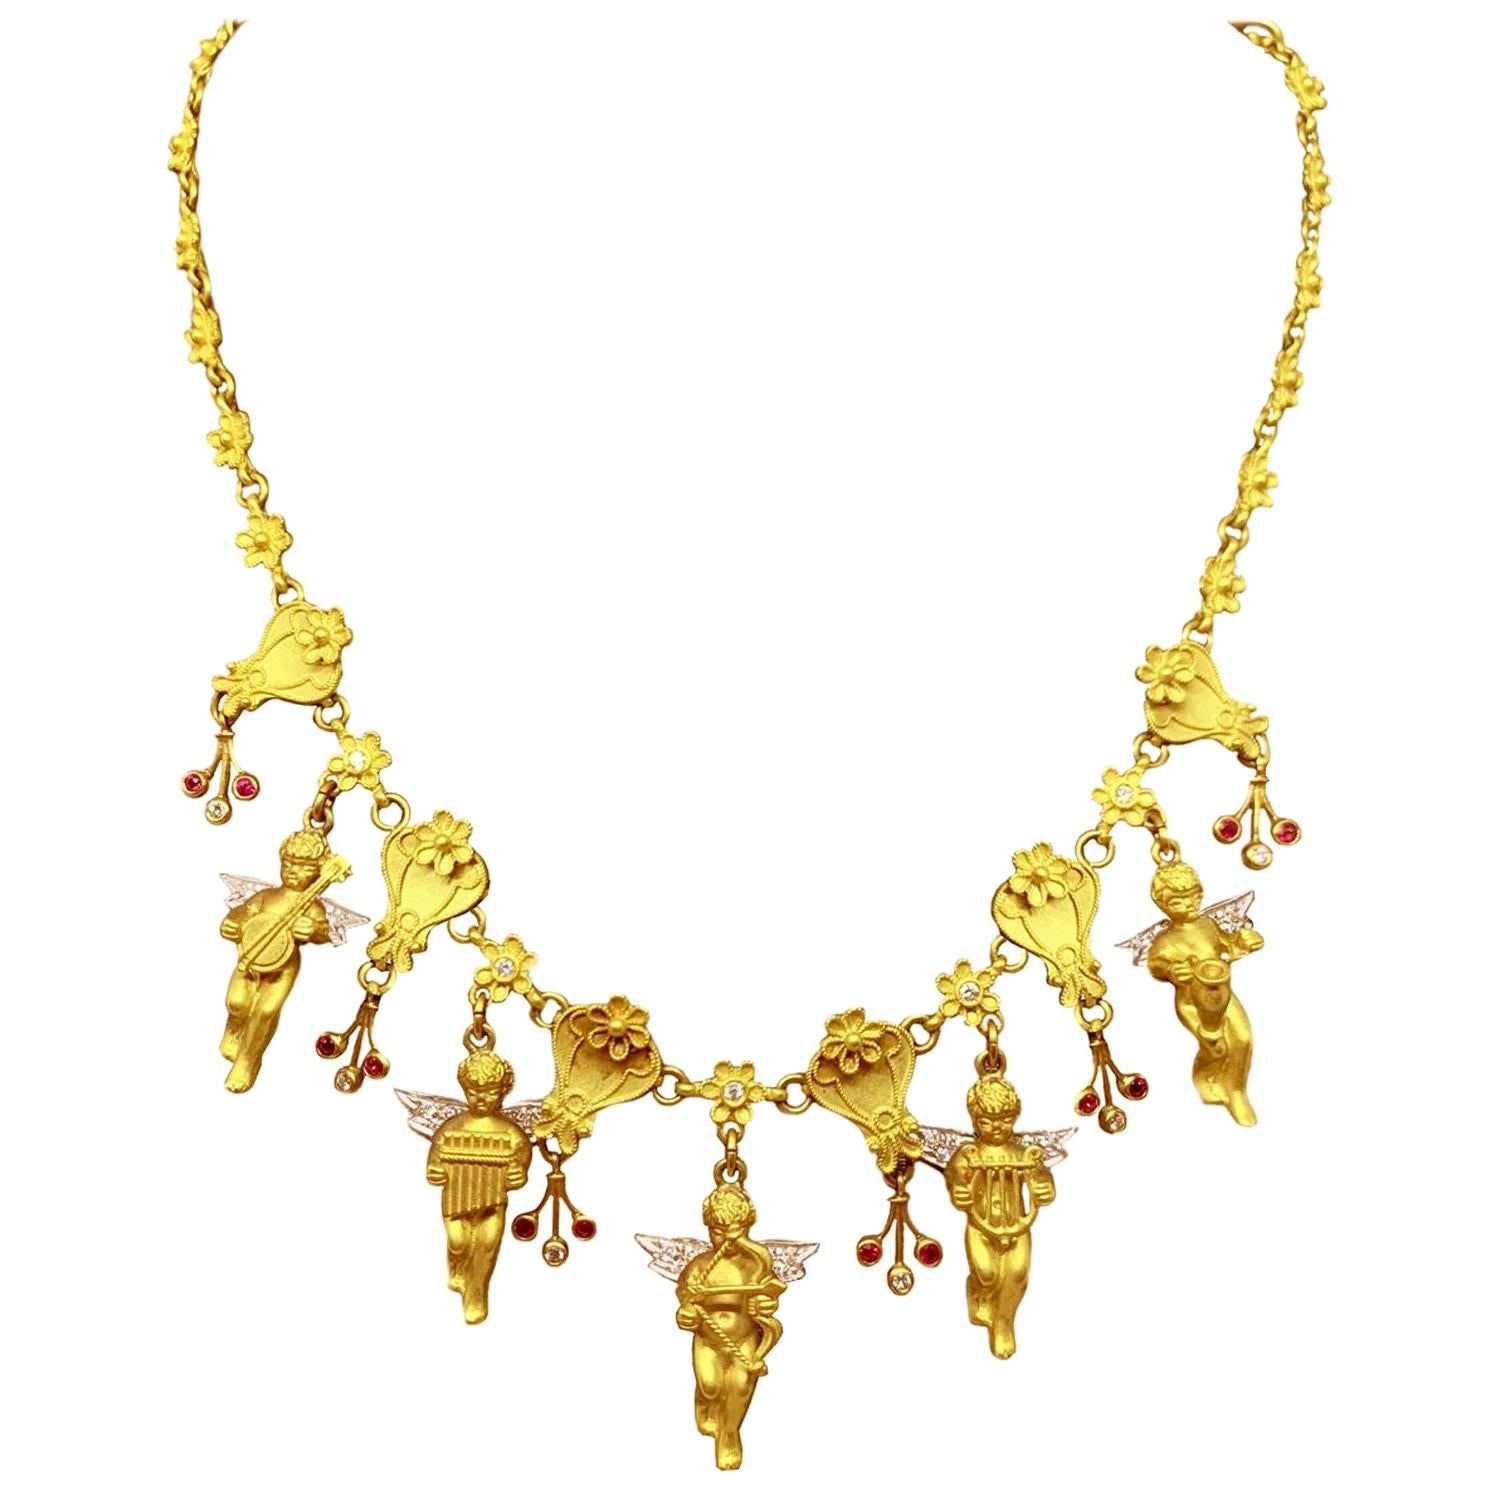  Cupid 'Eros' and Musician Angels 18 Karat Gold and Diamonds Necklace